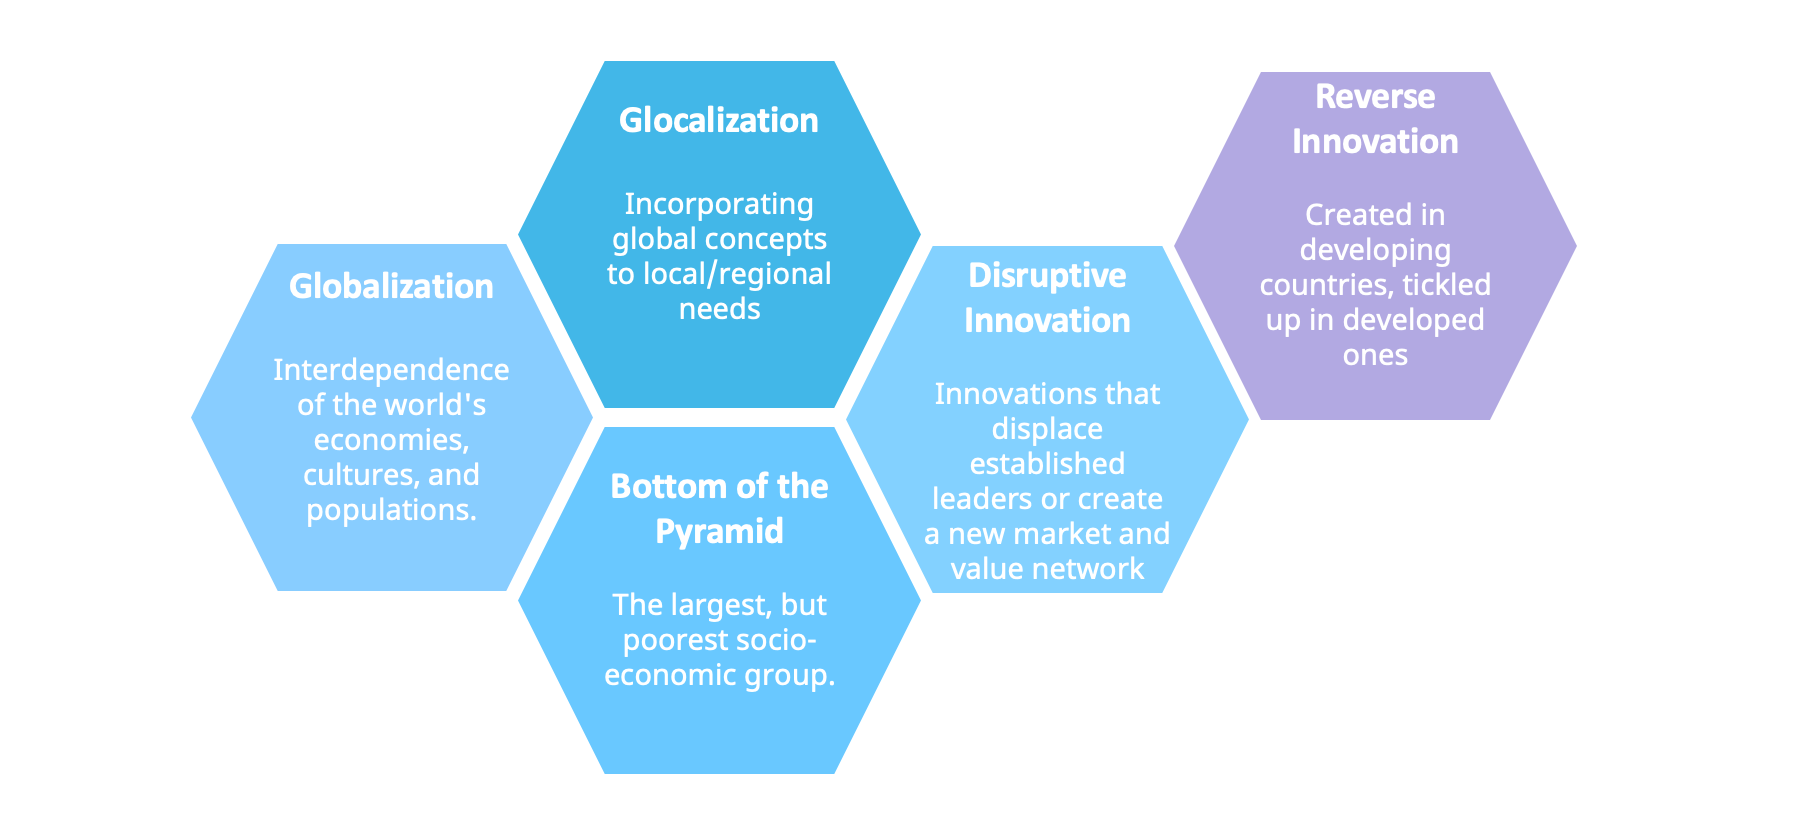 elements of reverse innovation